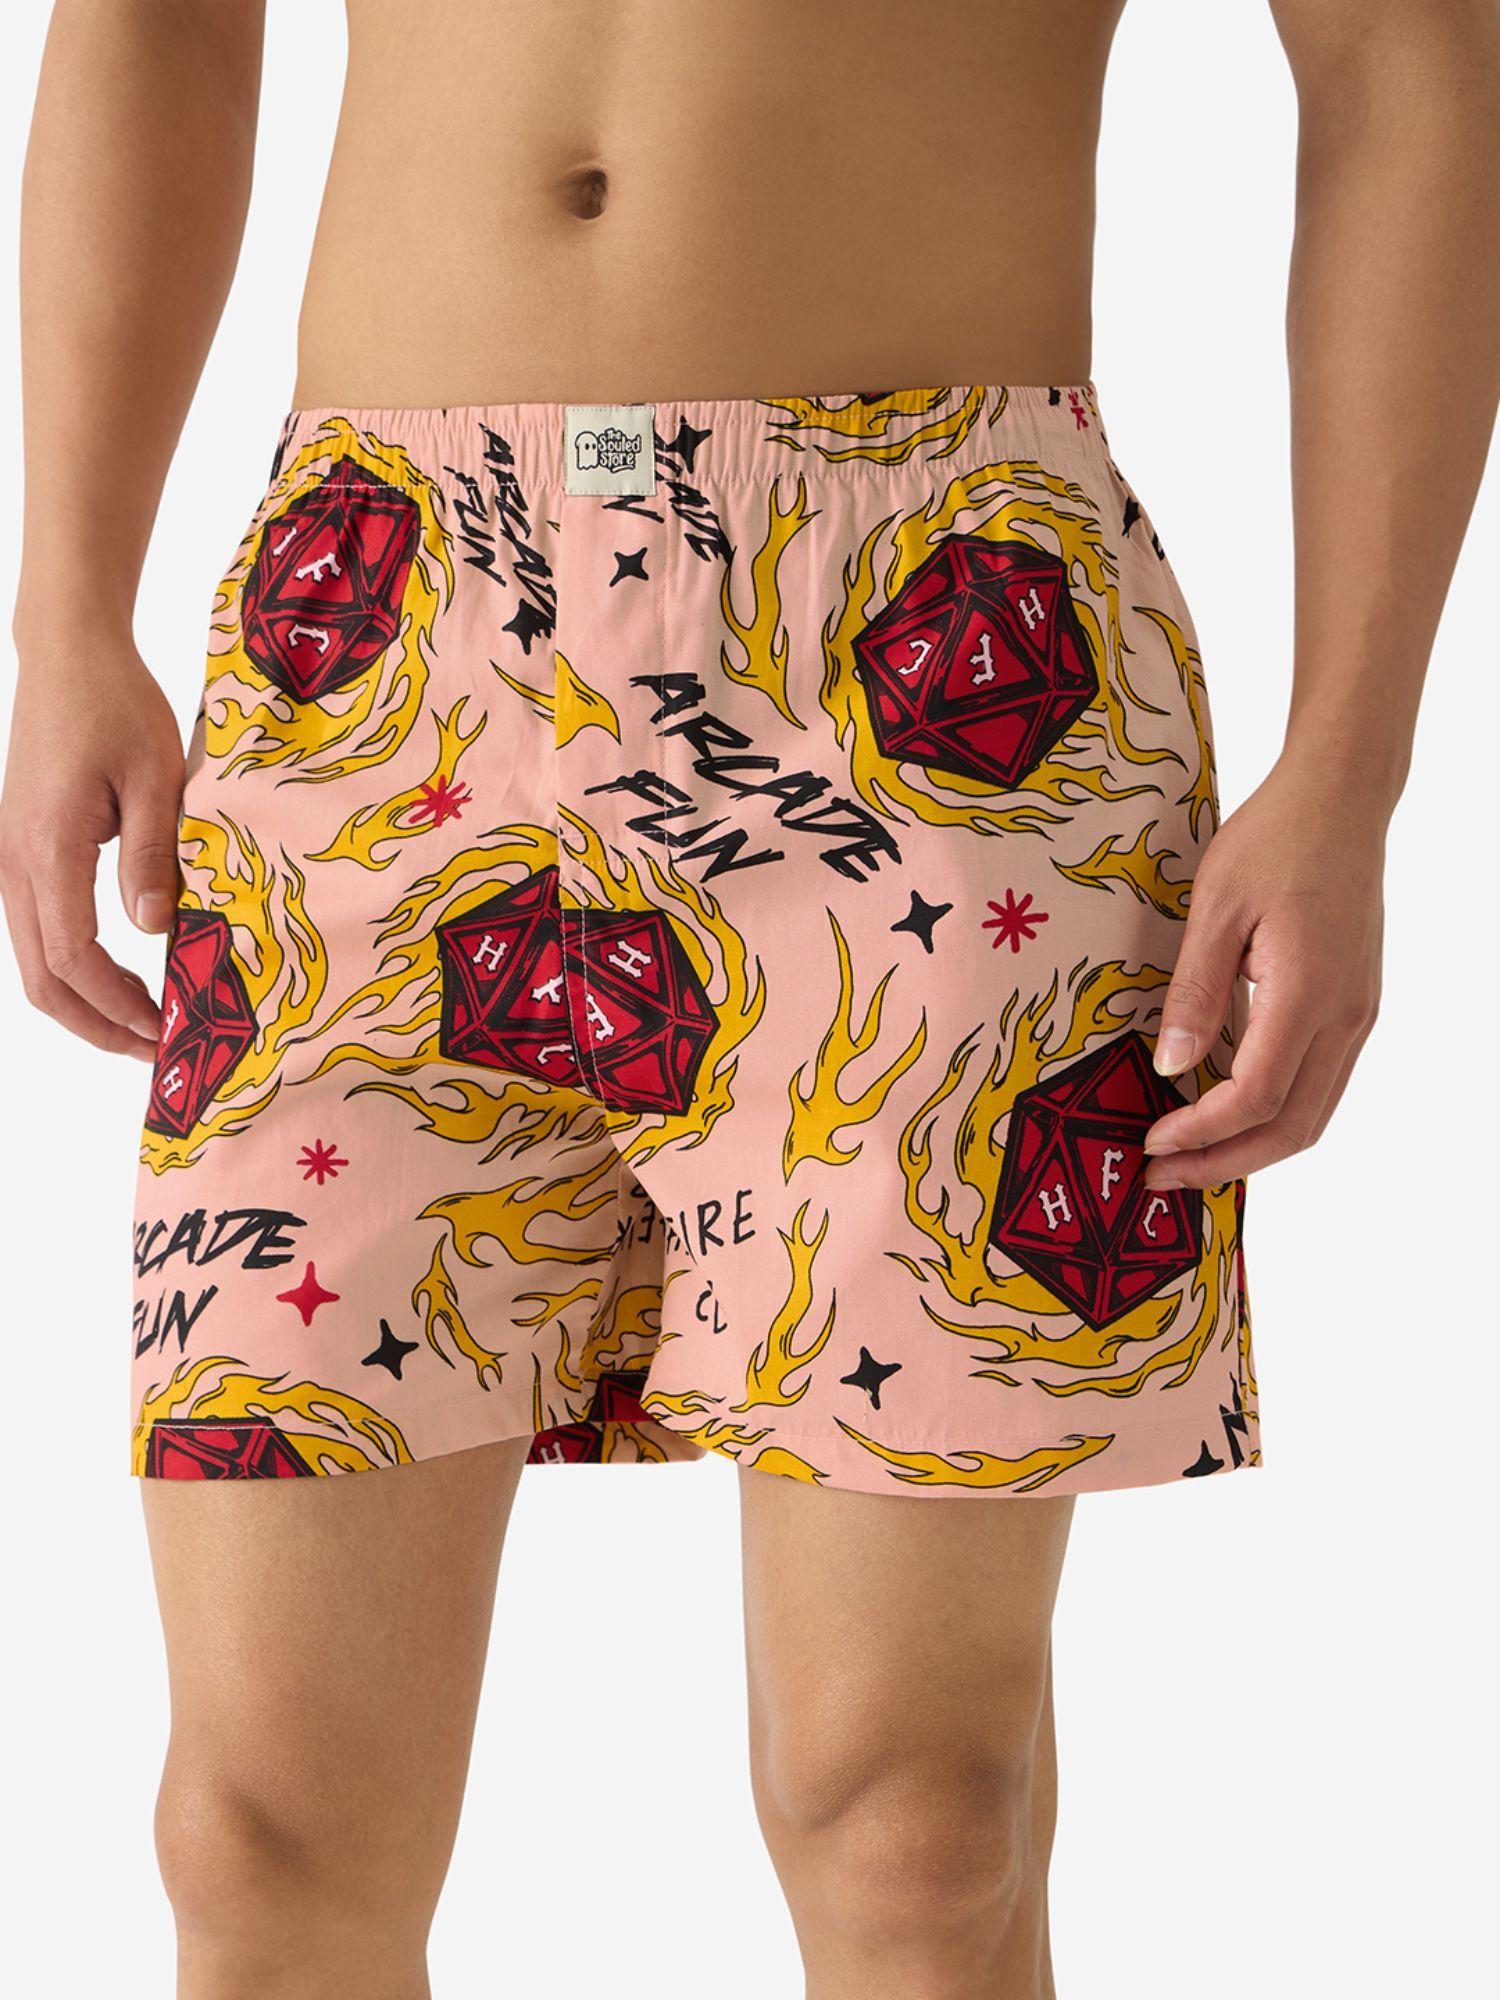 the soulted store official stranger things hellfire club boxer shorts